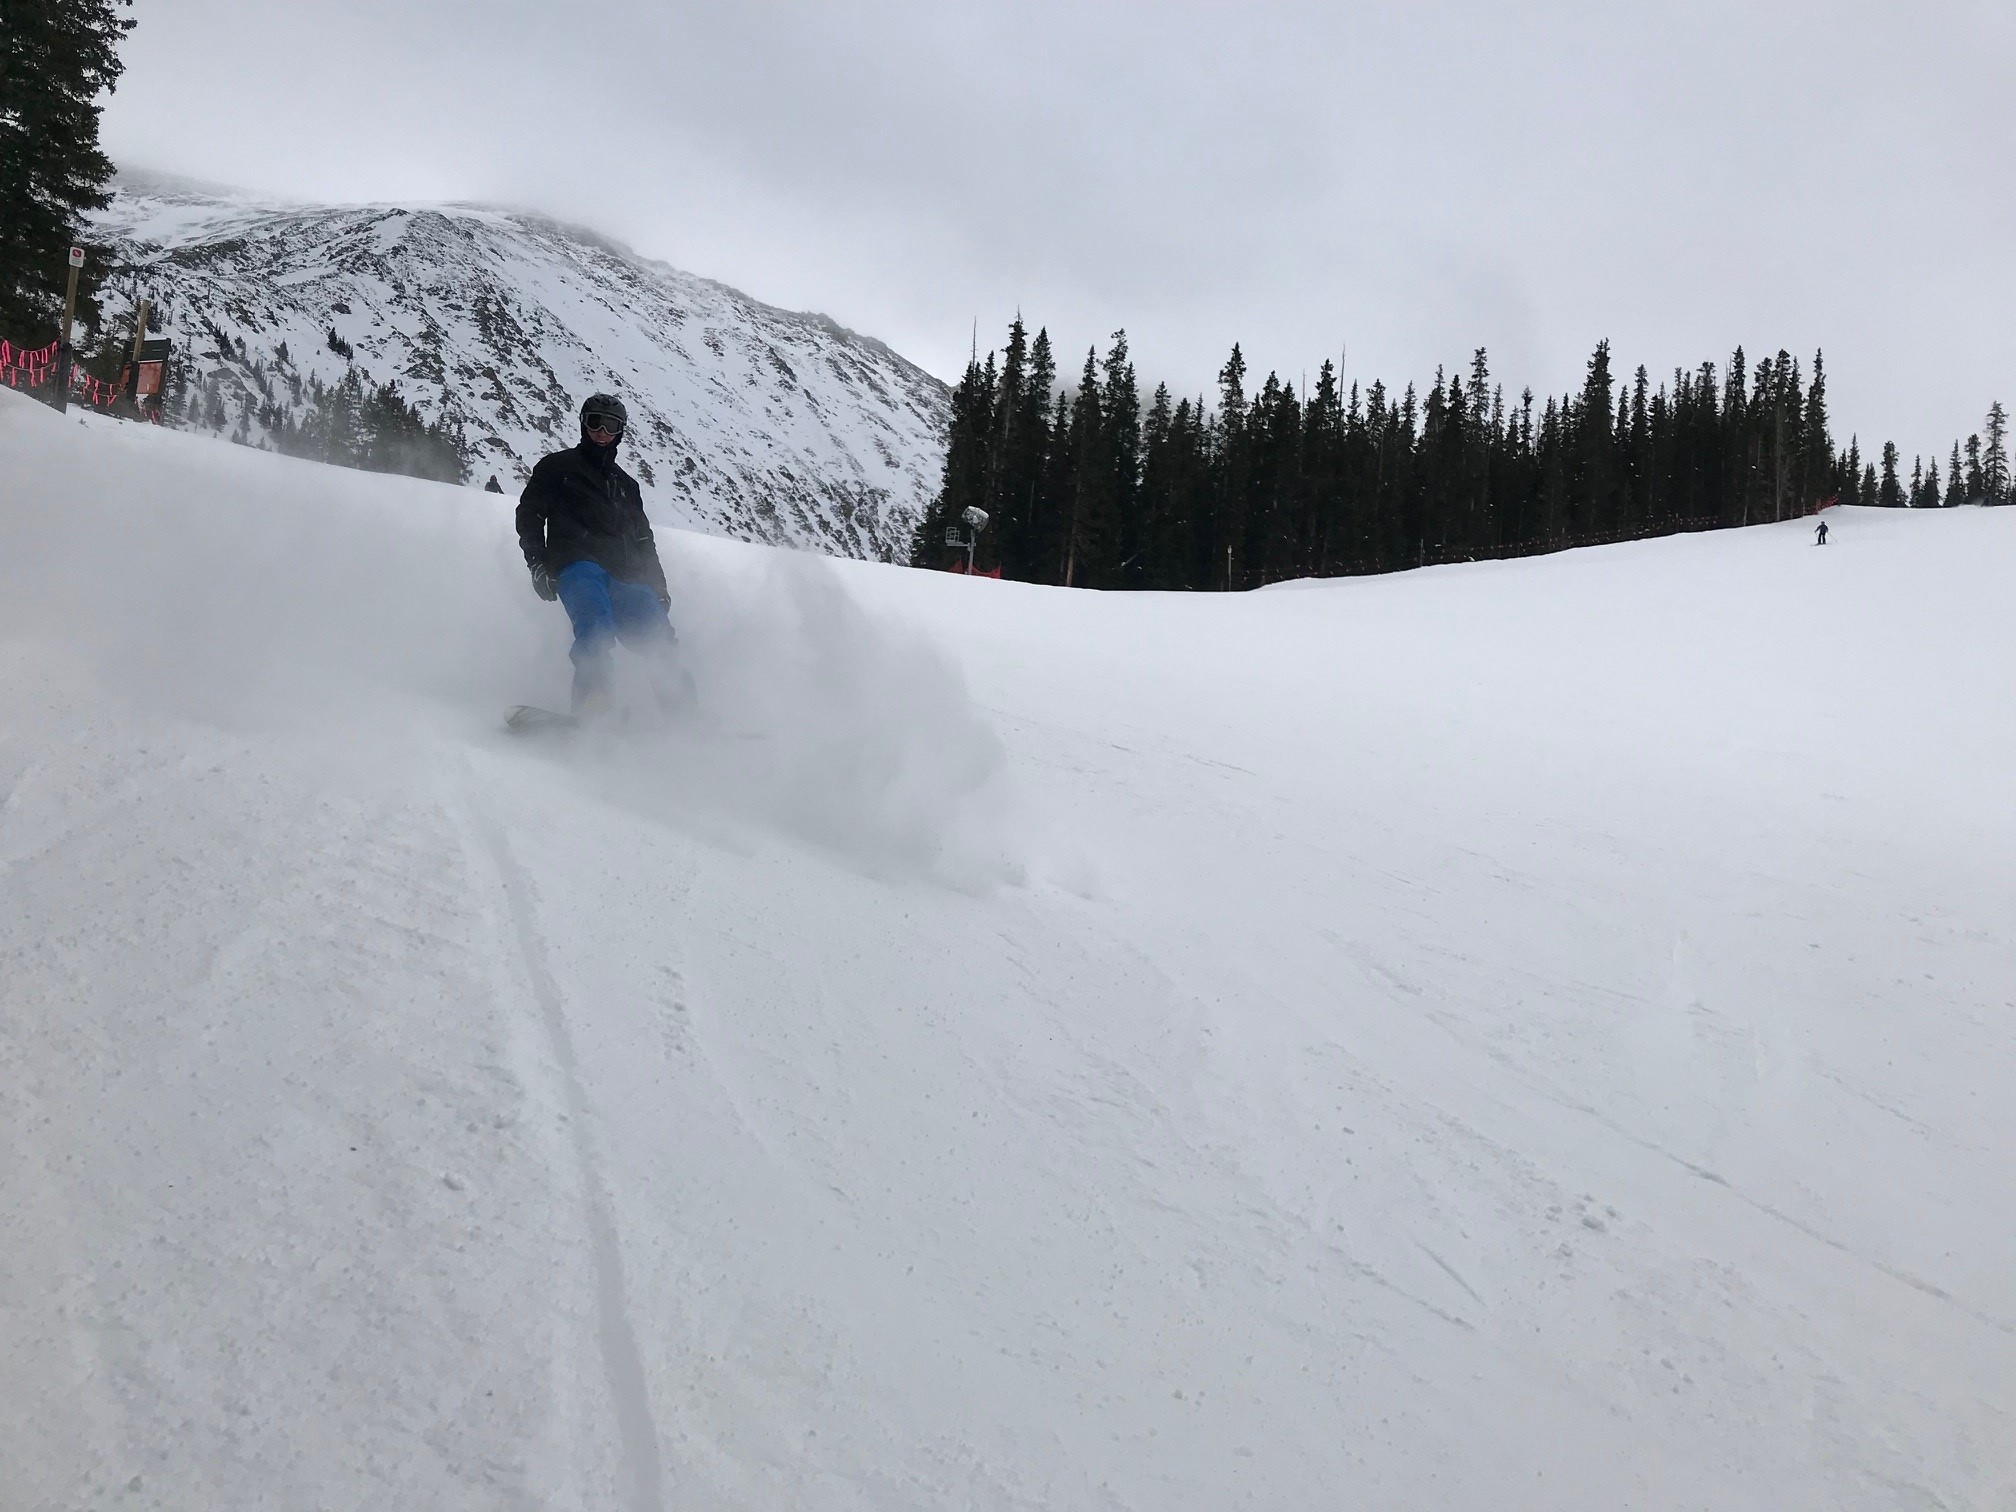 Steep and super-fun groomers for the days with no powder